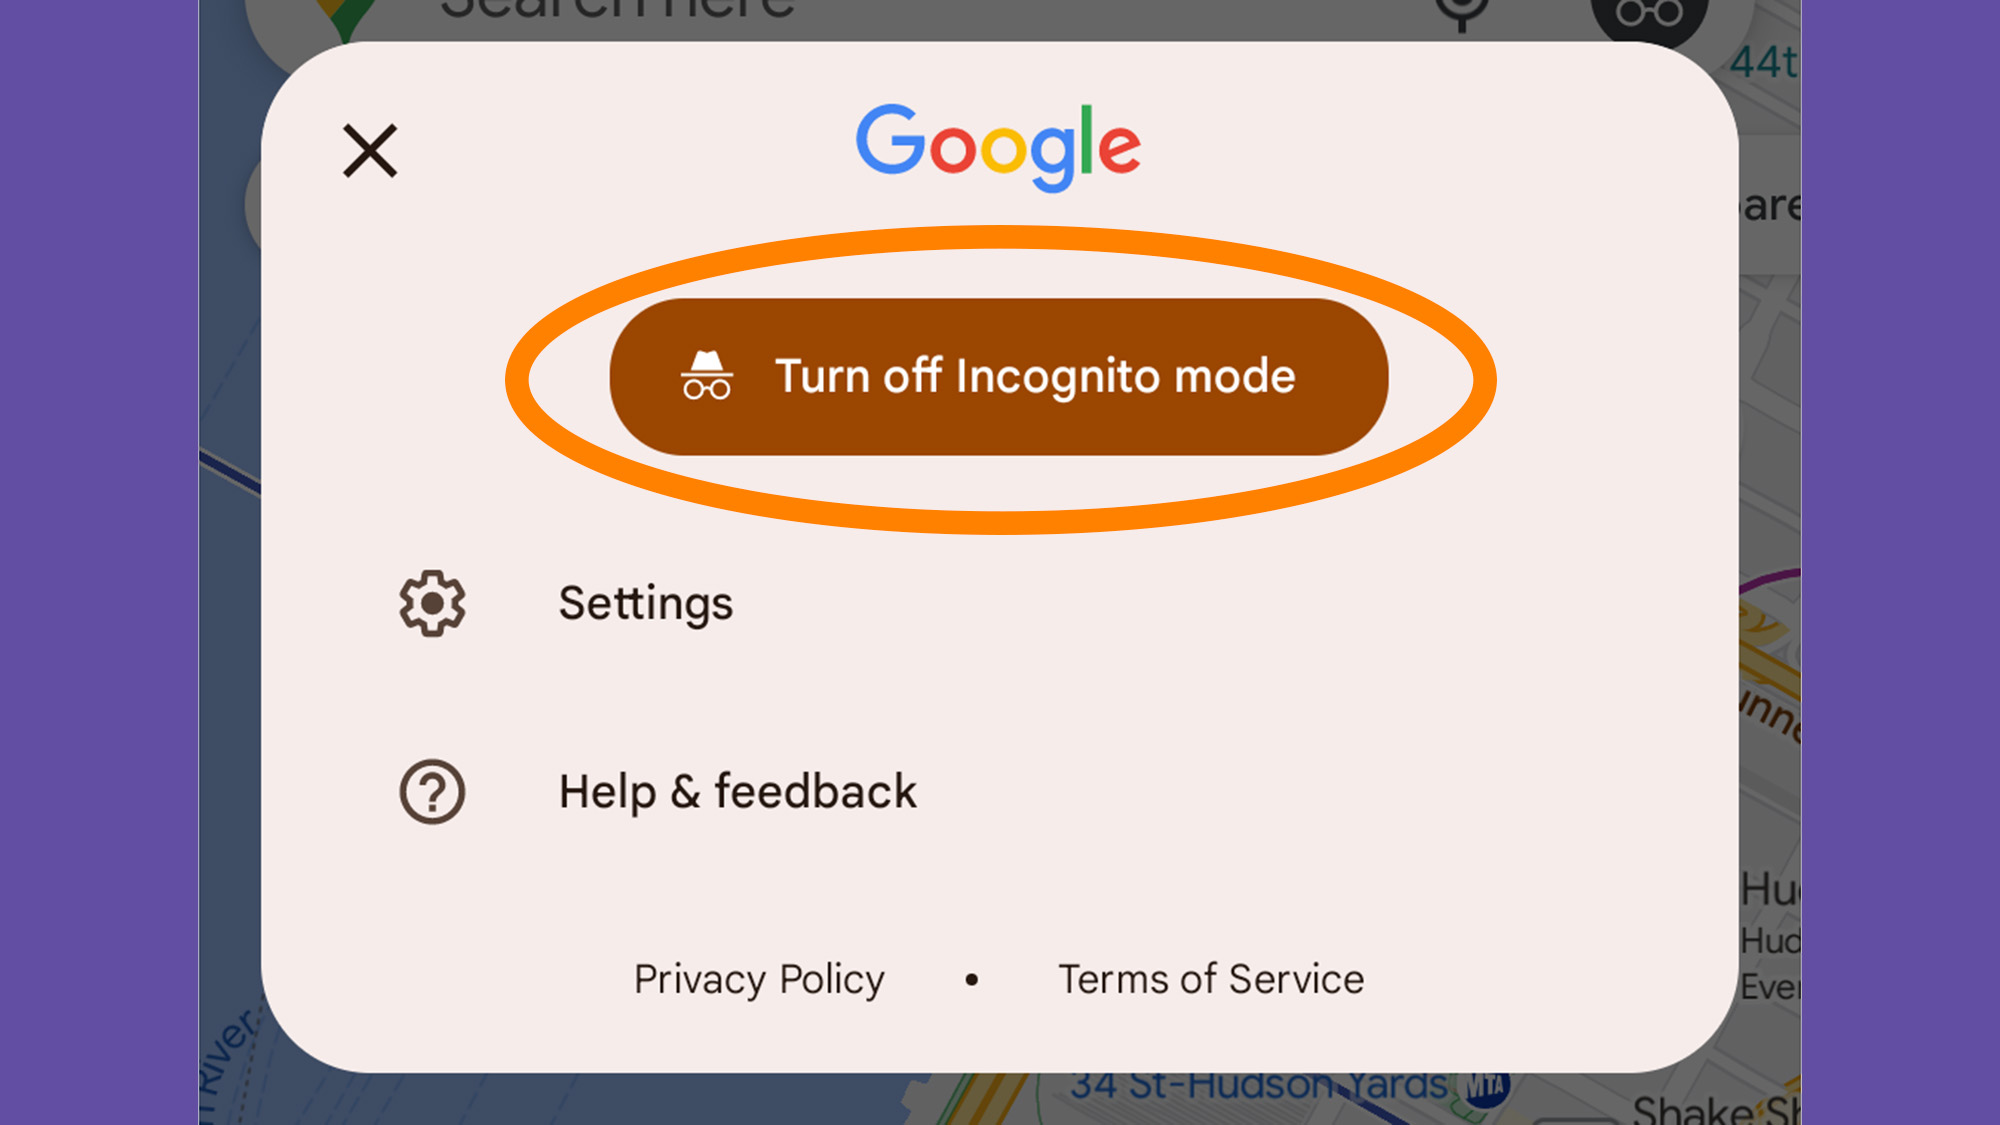 Turning off incognito mode on Google Maps